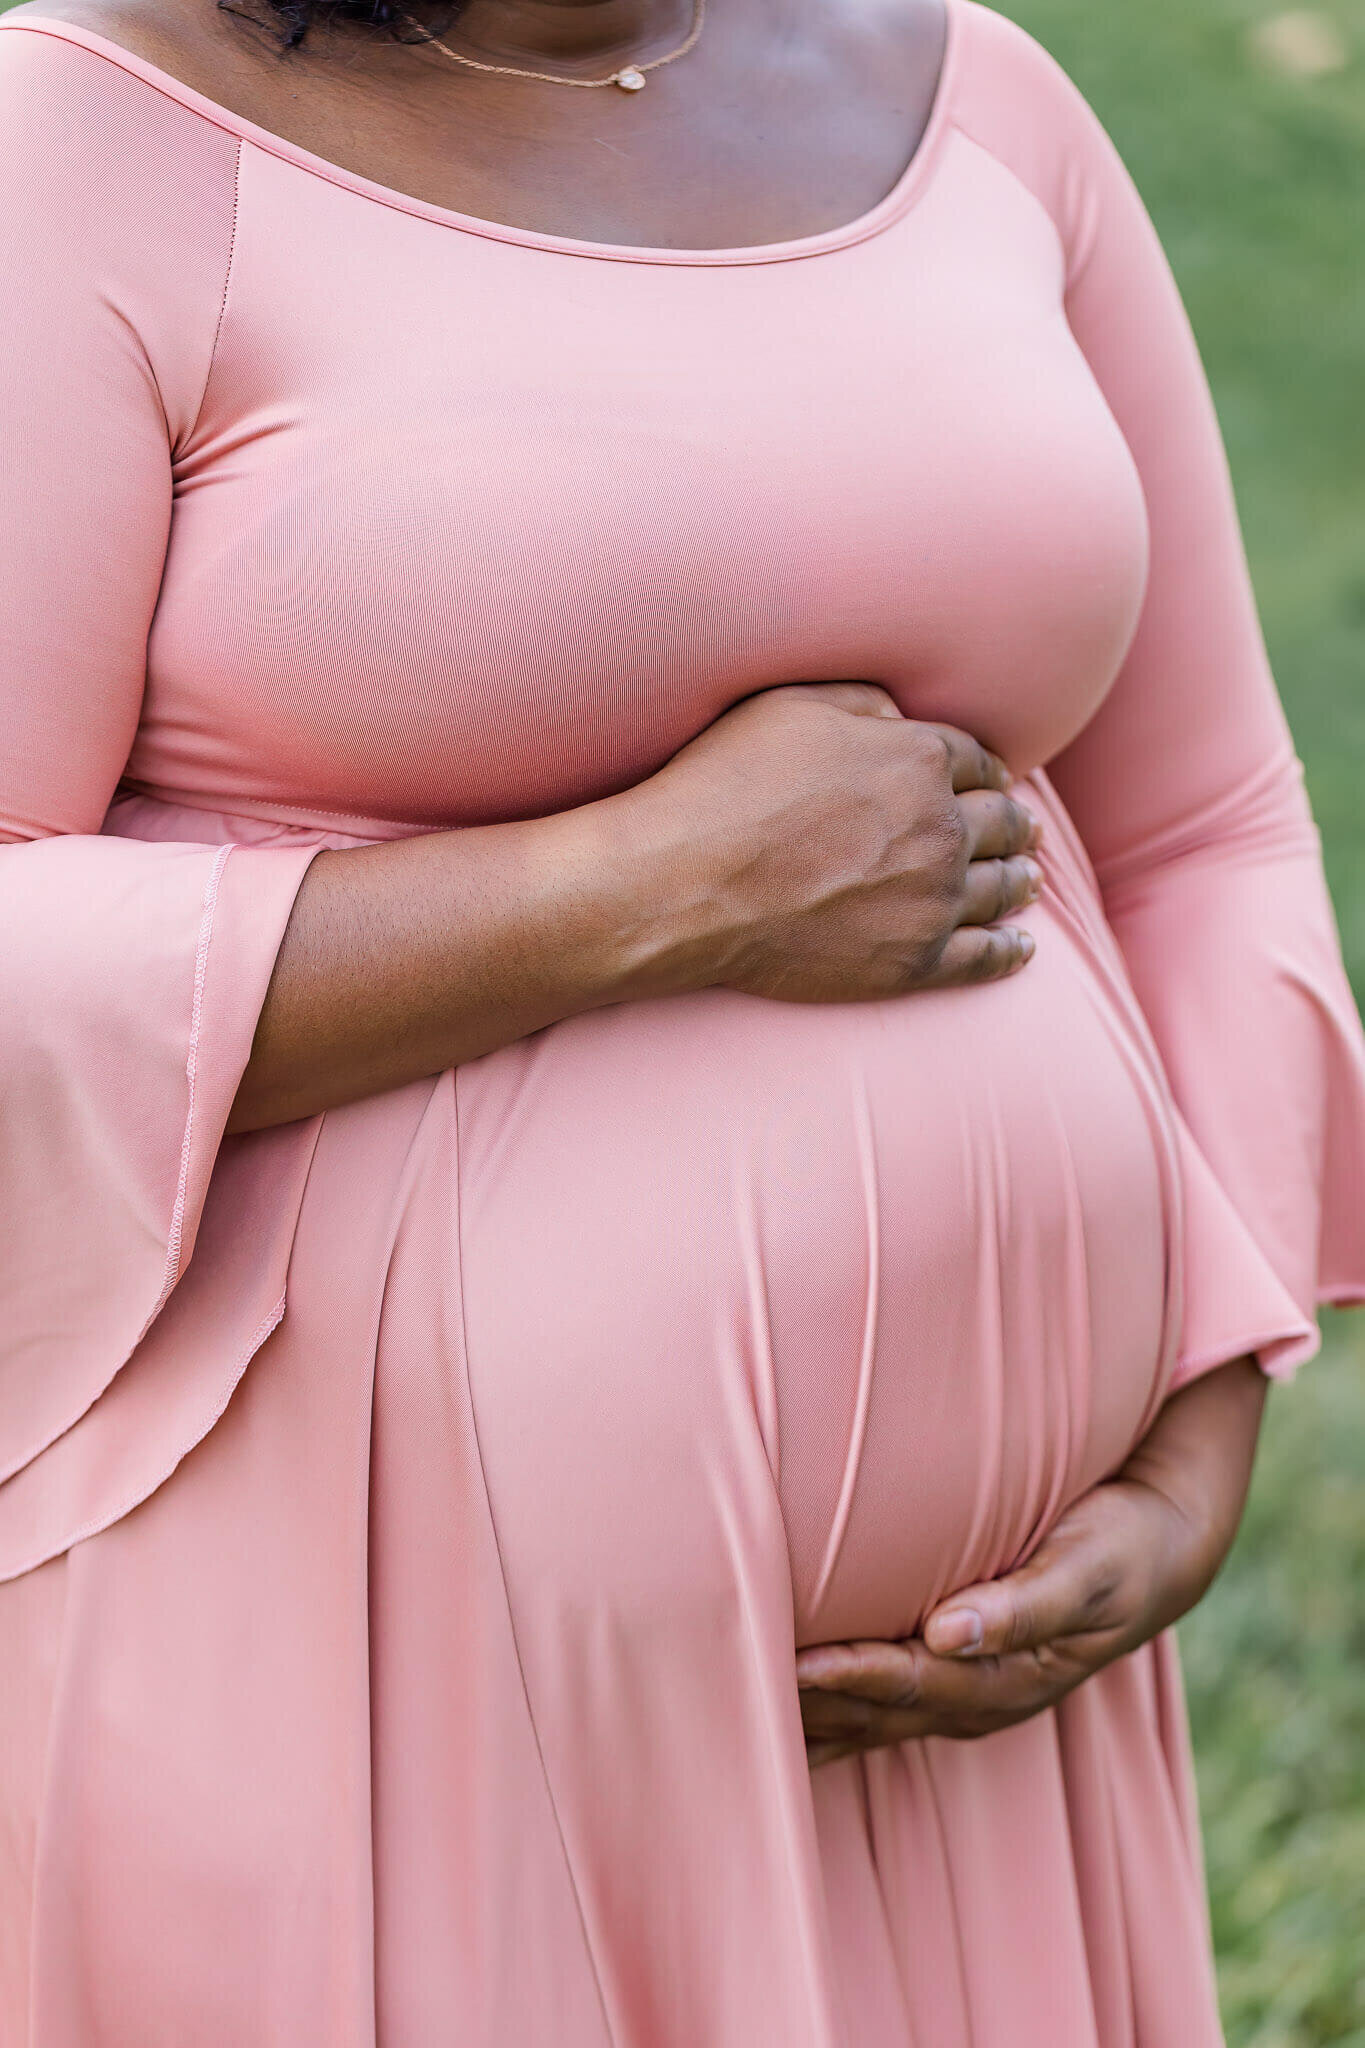 A side view of a pregnant woman's belly in a pink dress during her maternity session.